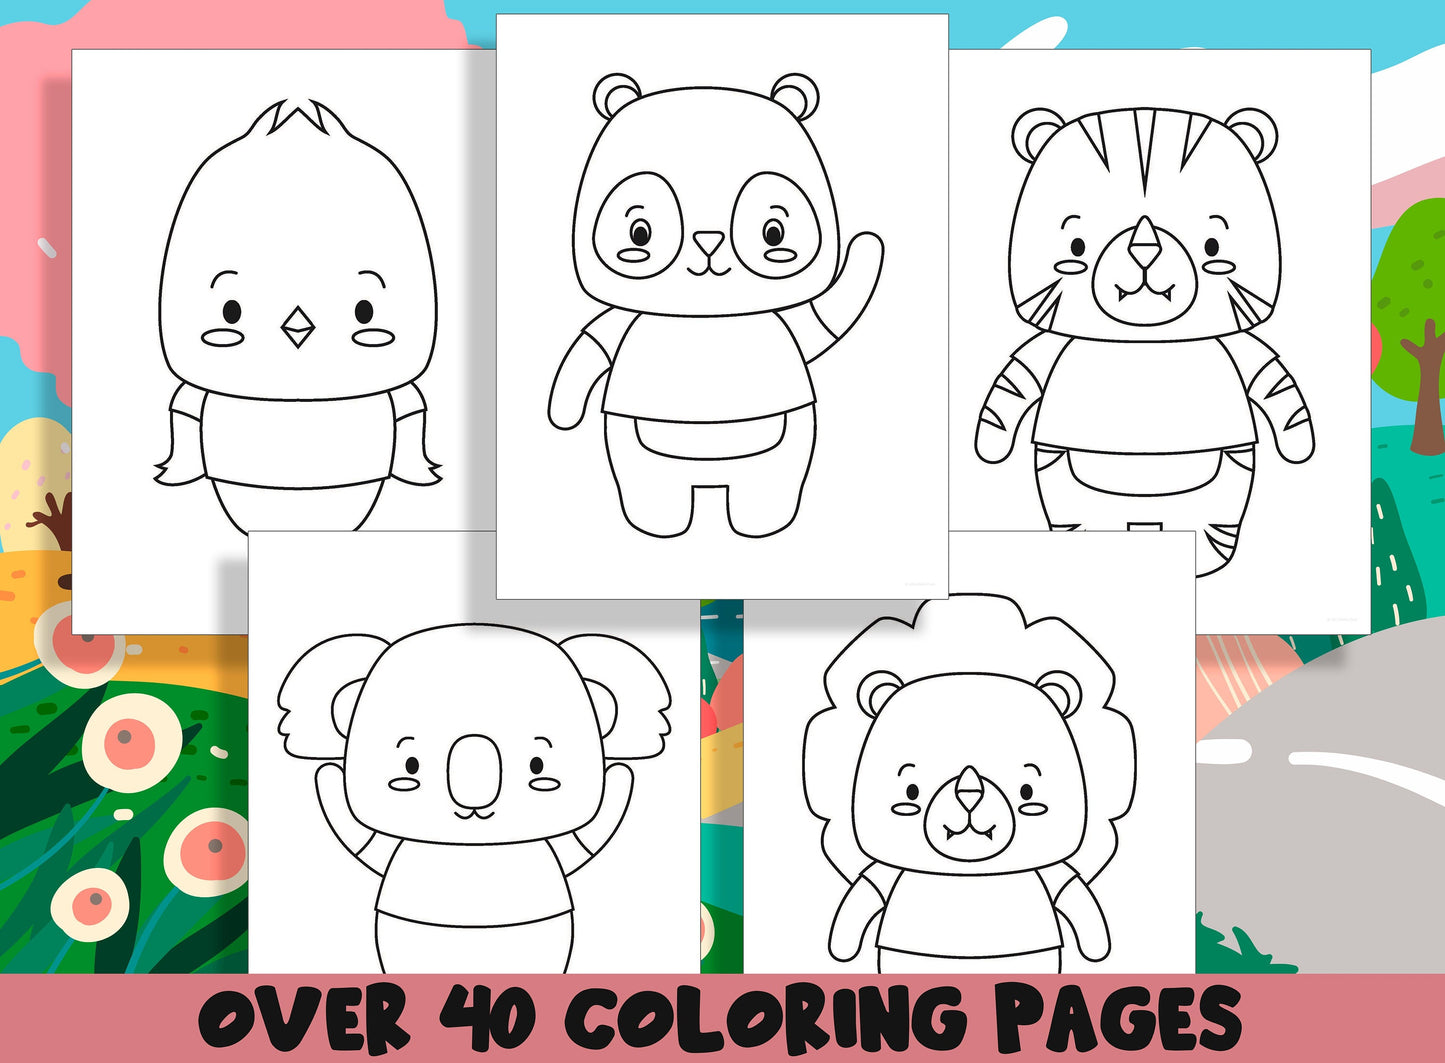 Animal Coloring Book, 40 Printable Animal Coloring Pages for Preschool, Kindergarten and Elementary School Children to Print and Color.